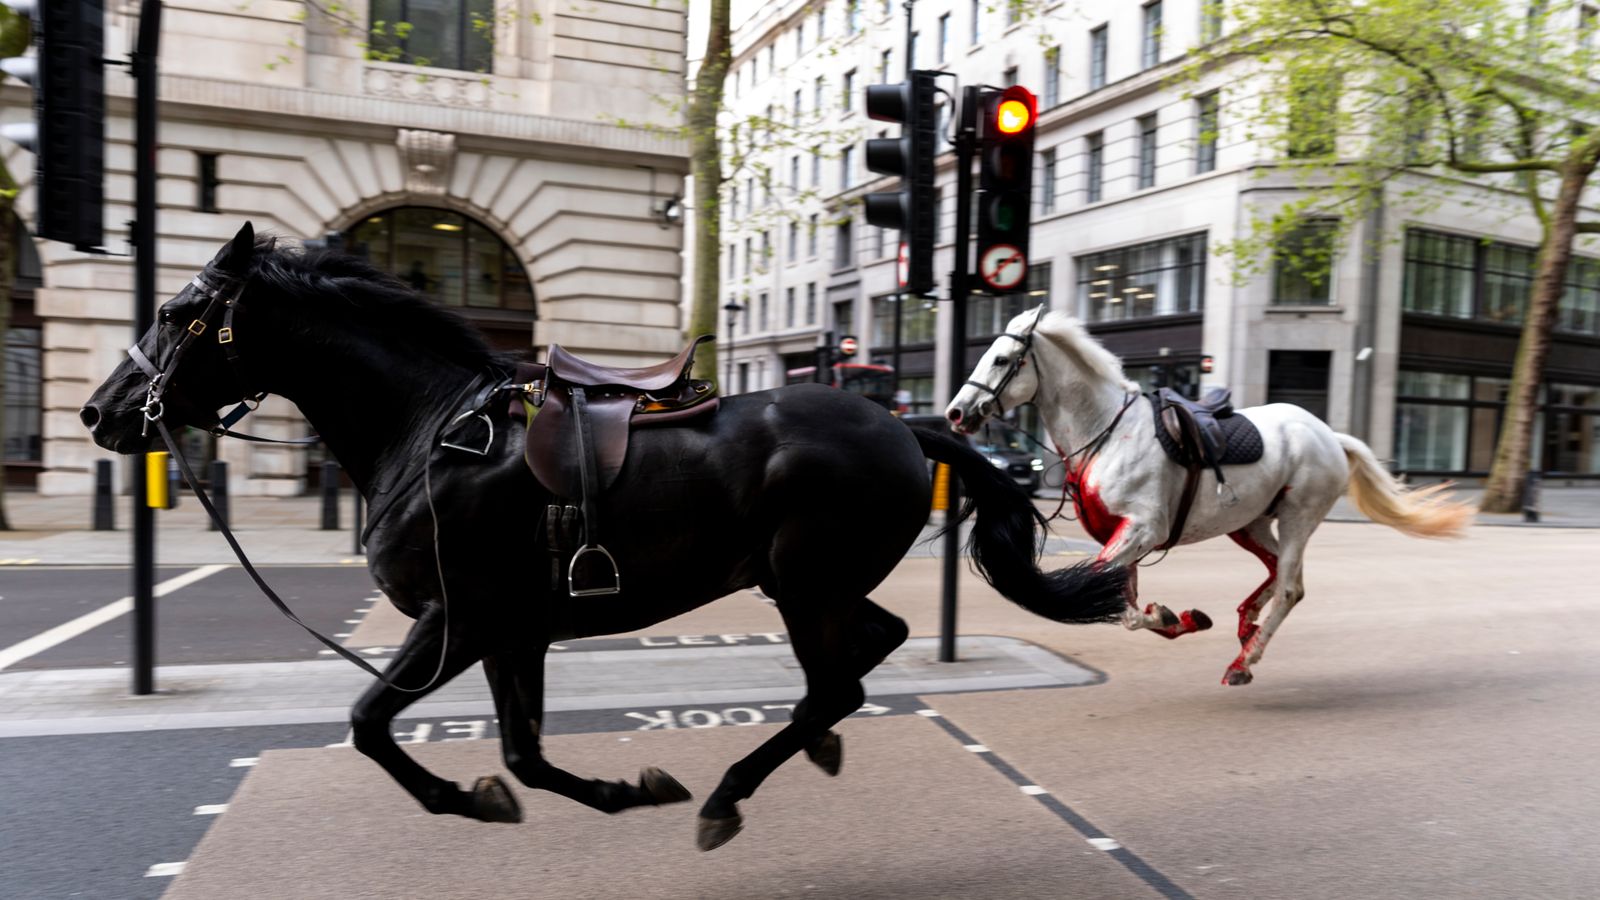 Multiple Loose Horses Seen Running in Central London, One Covered in Blood